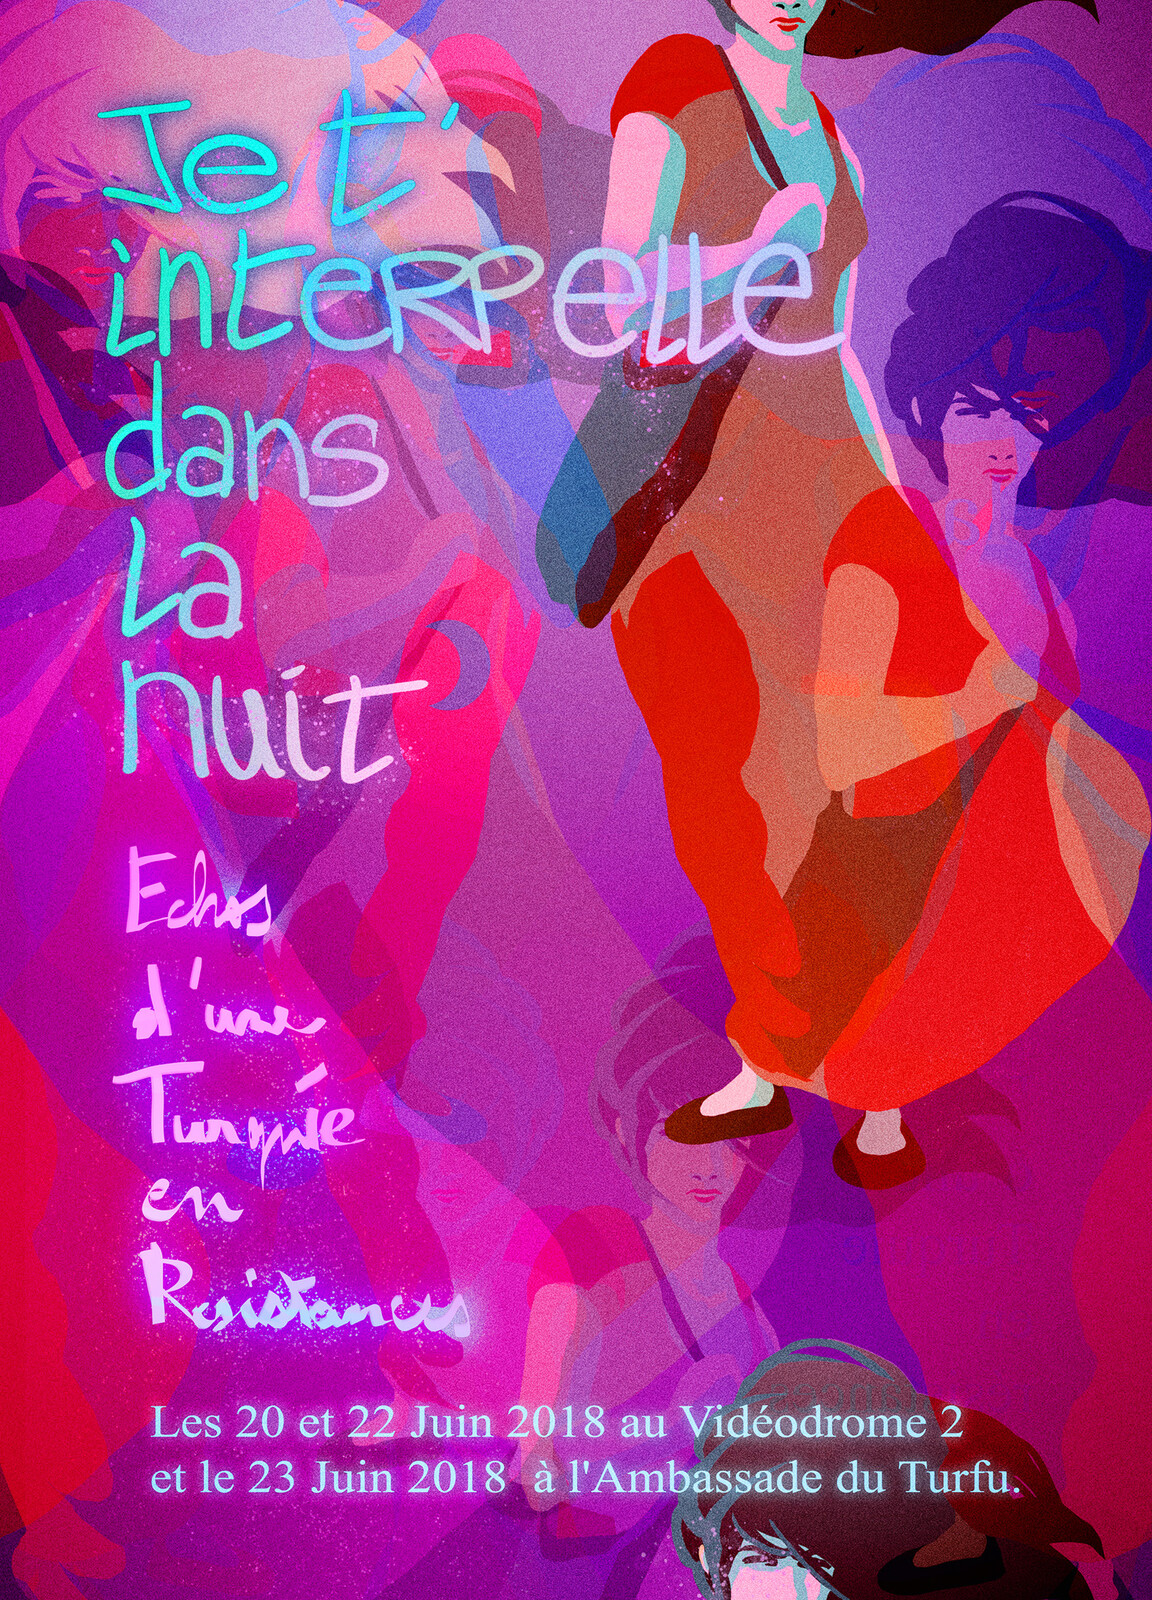 Poster for a festival.